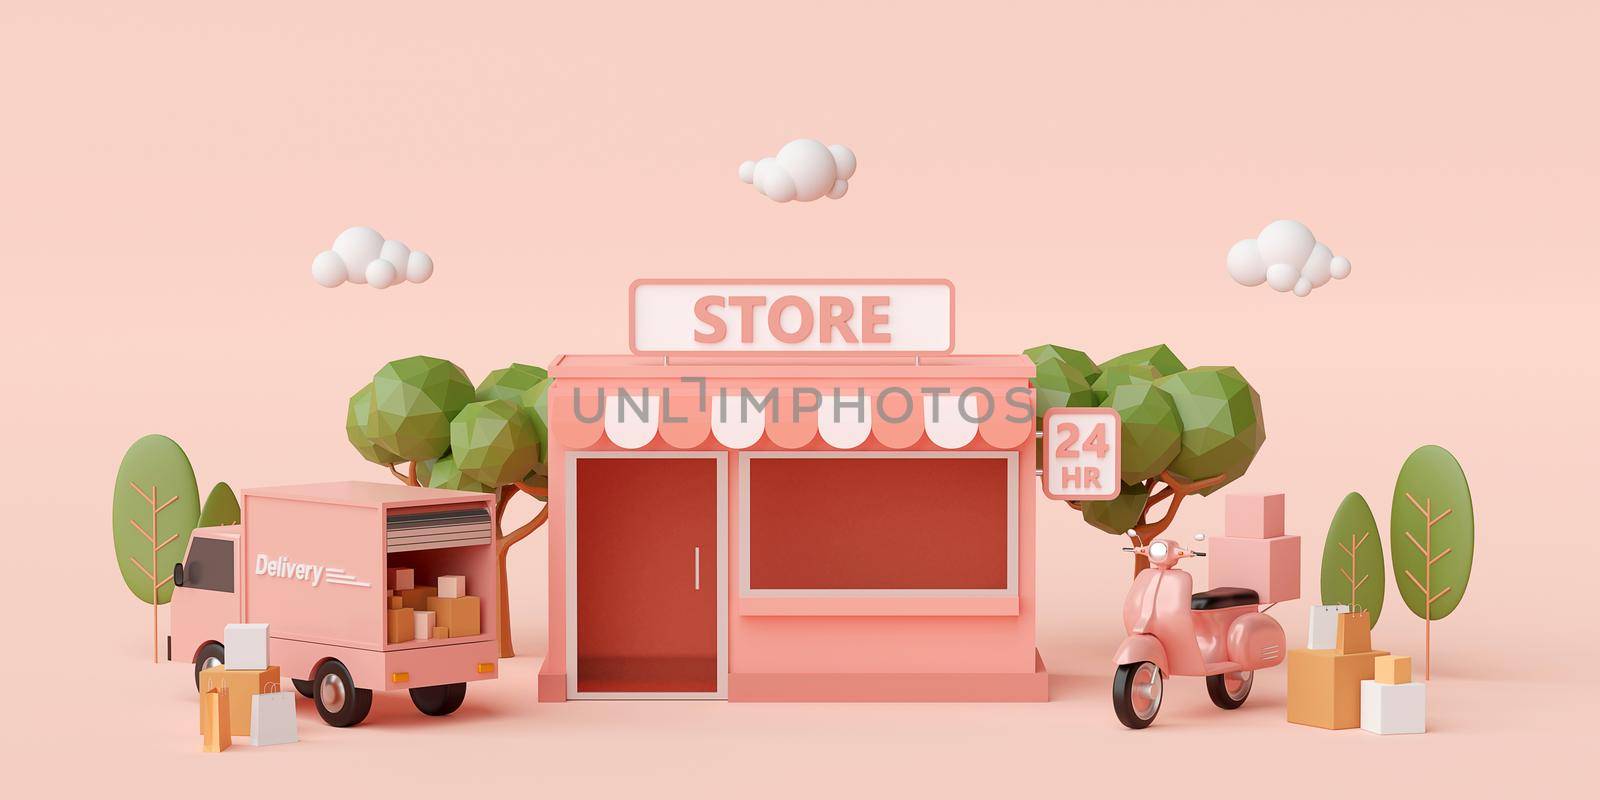 E-commerce concept, Convenience store and delivery service by scooter and truck, 3d illustration by nutzchotwarut